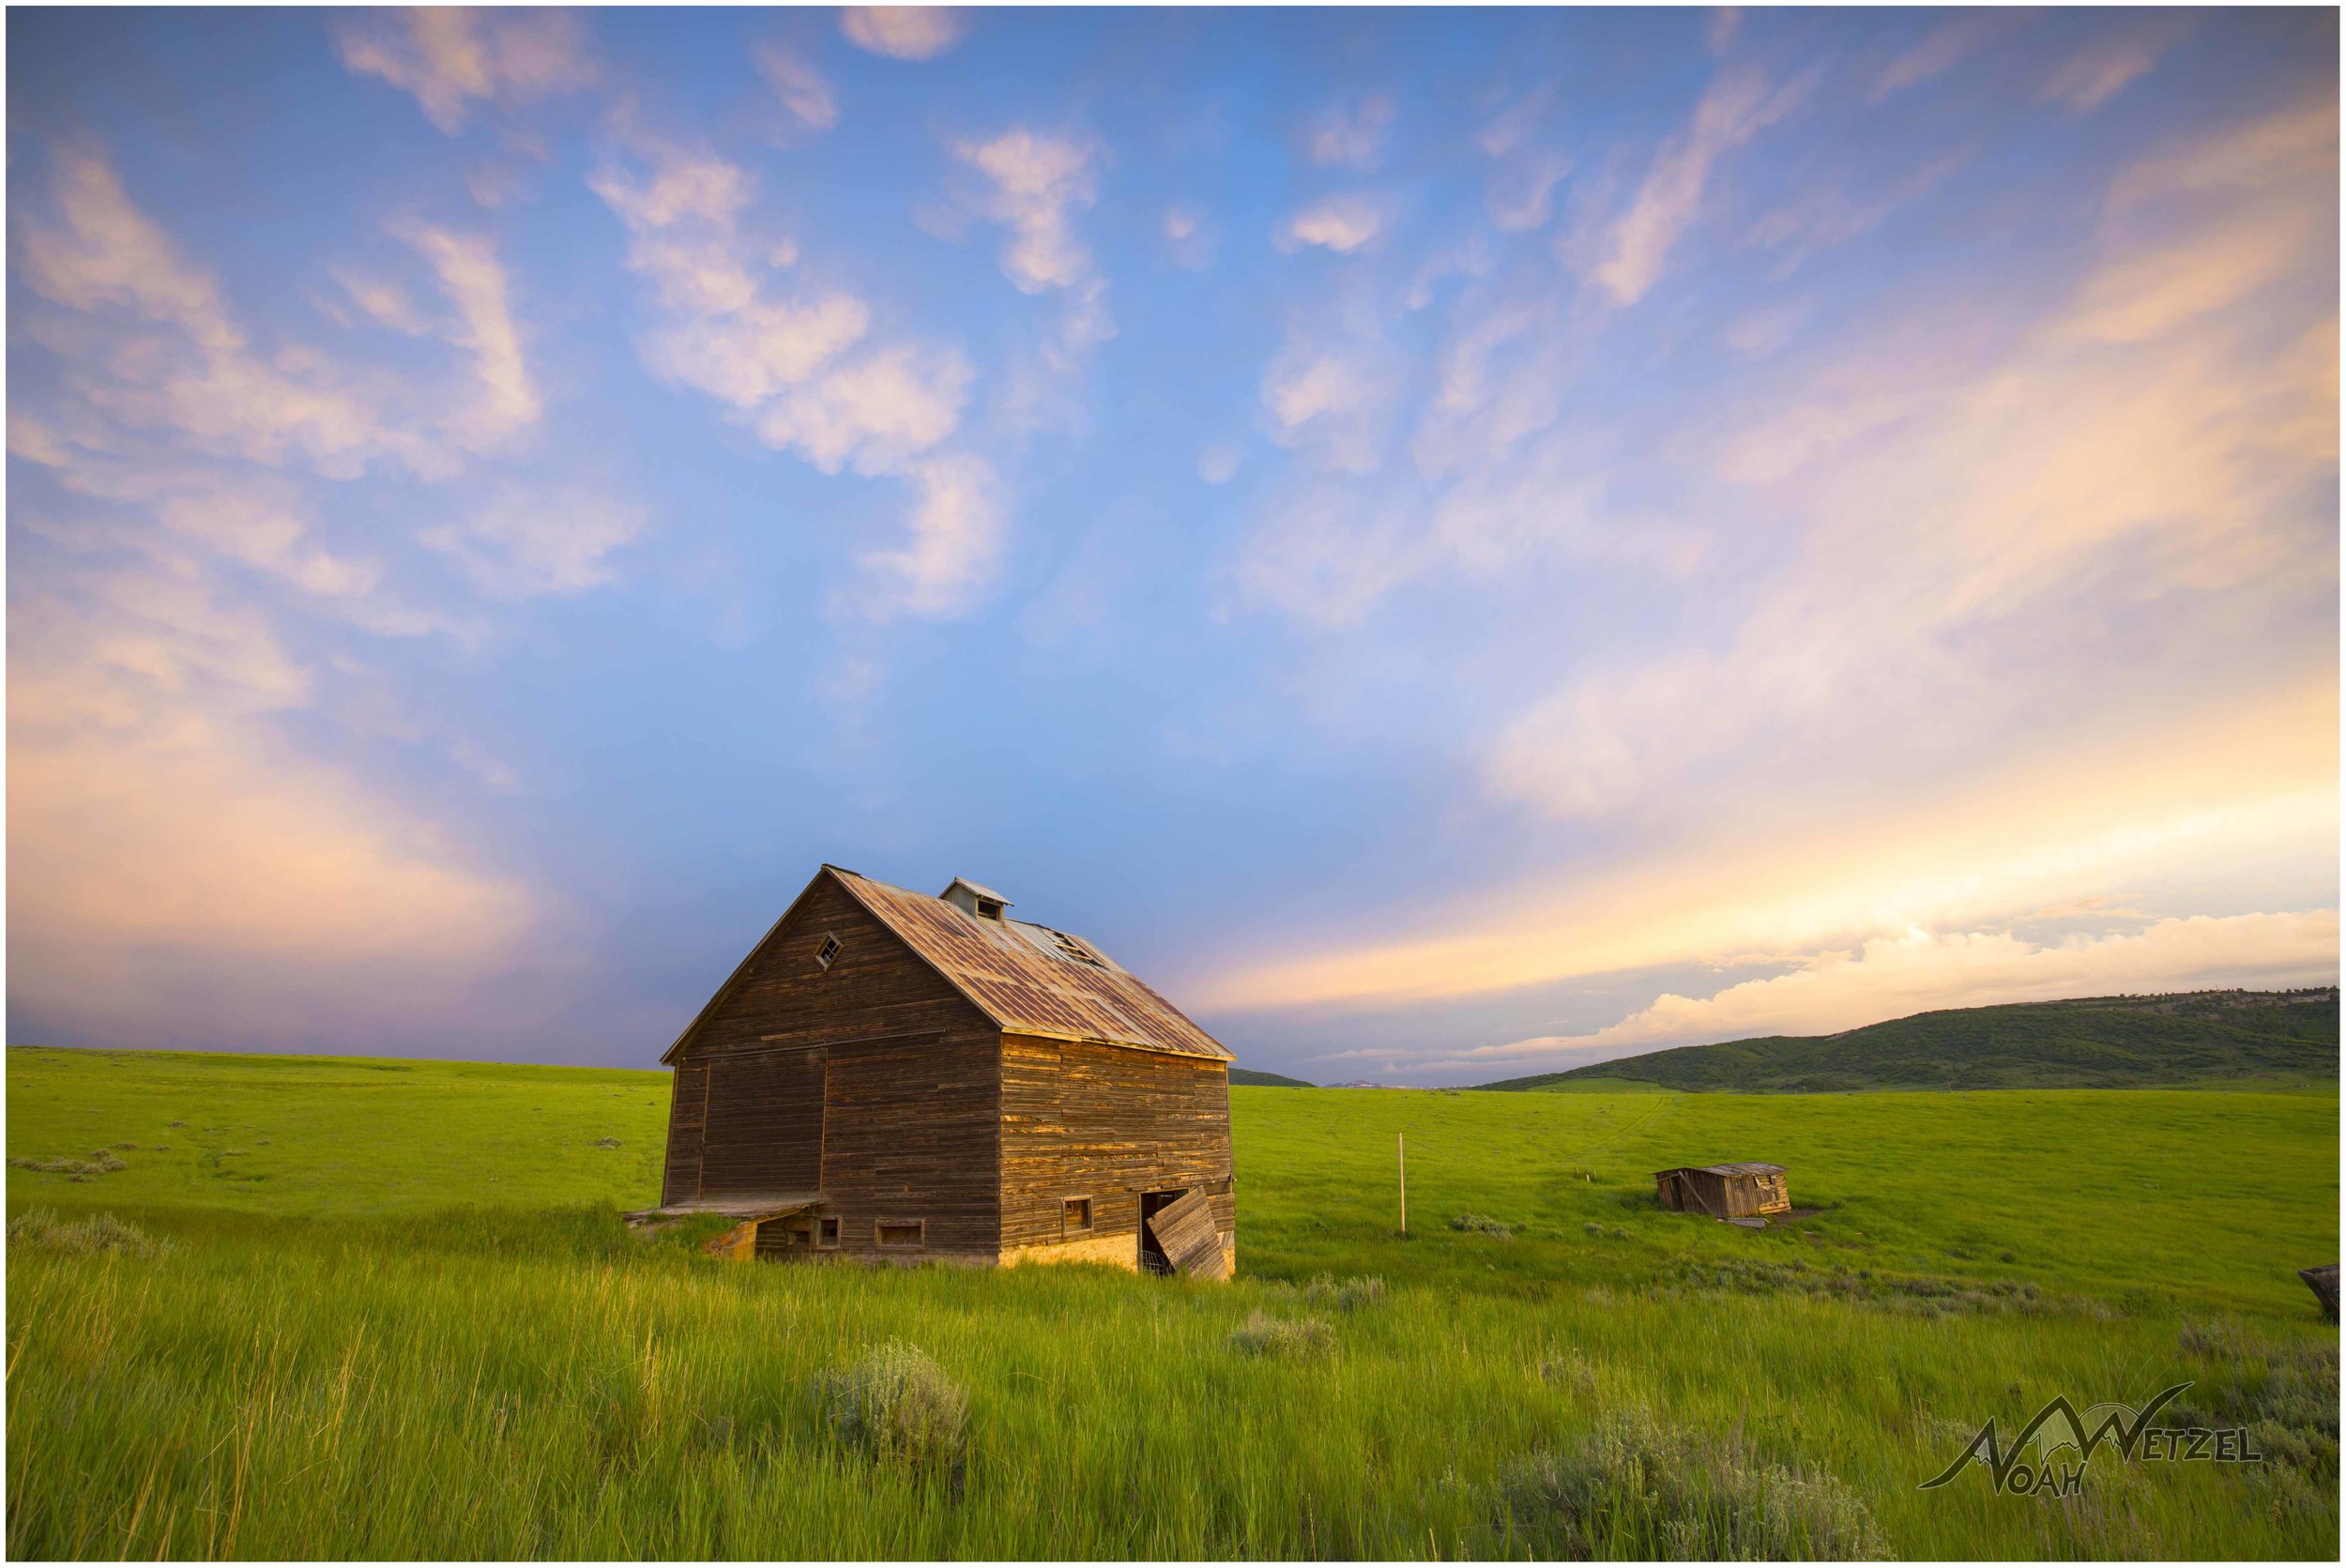 Barn Sunset on 20 Mile Road outside Steamboat Springs, Colorado. 